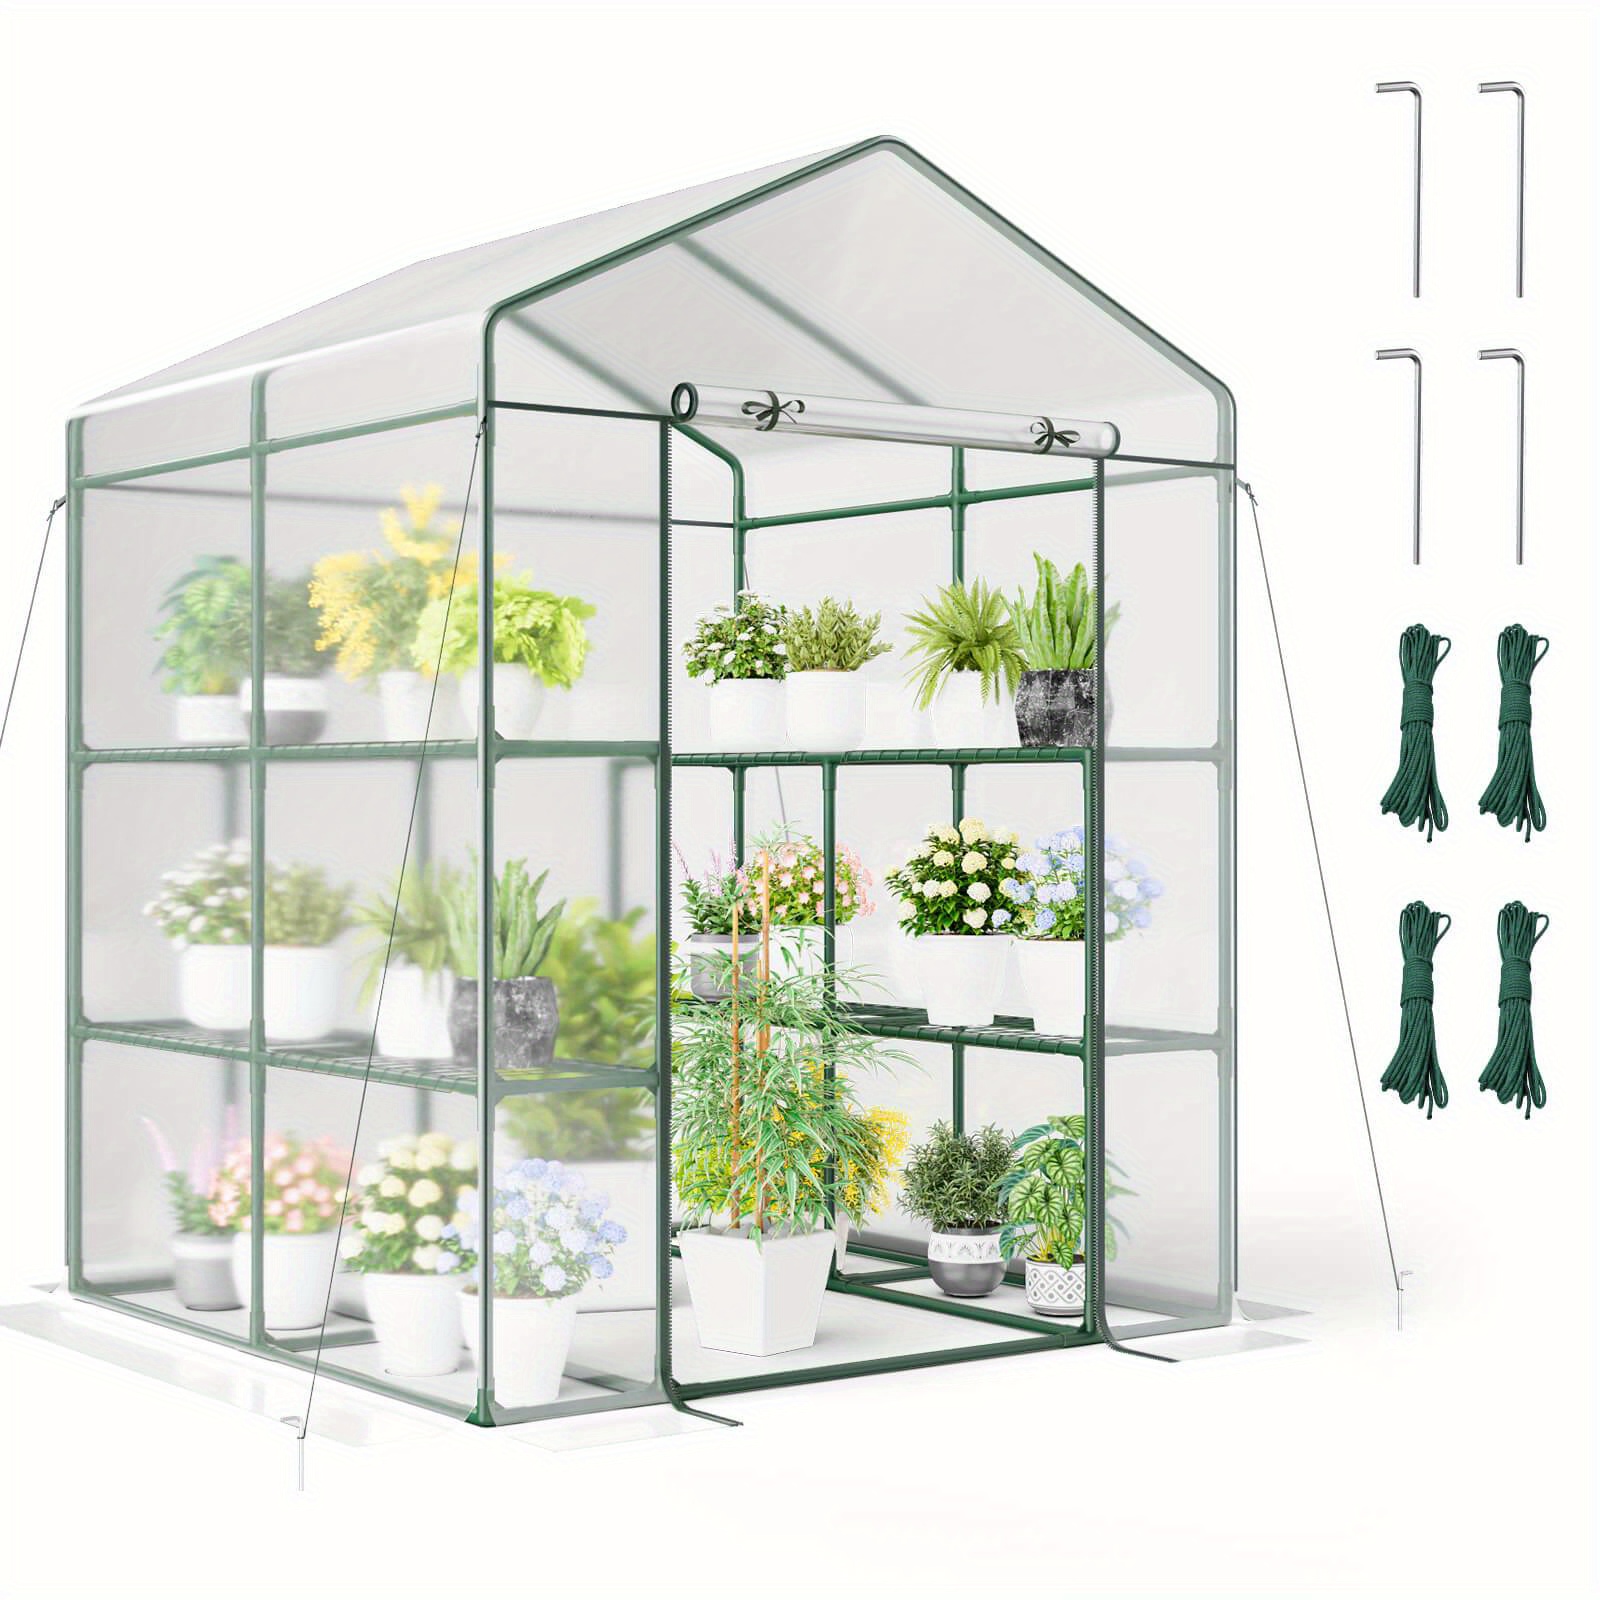 

Lifezeal Portable Mini Greenhouse W/4 Tiers 8 Shelves Roll-up Zippered Door For Plants